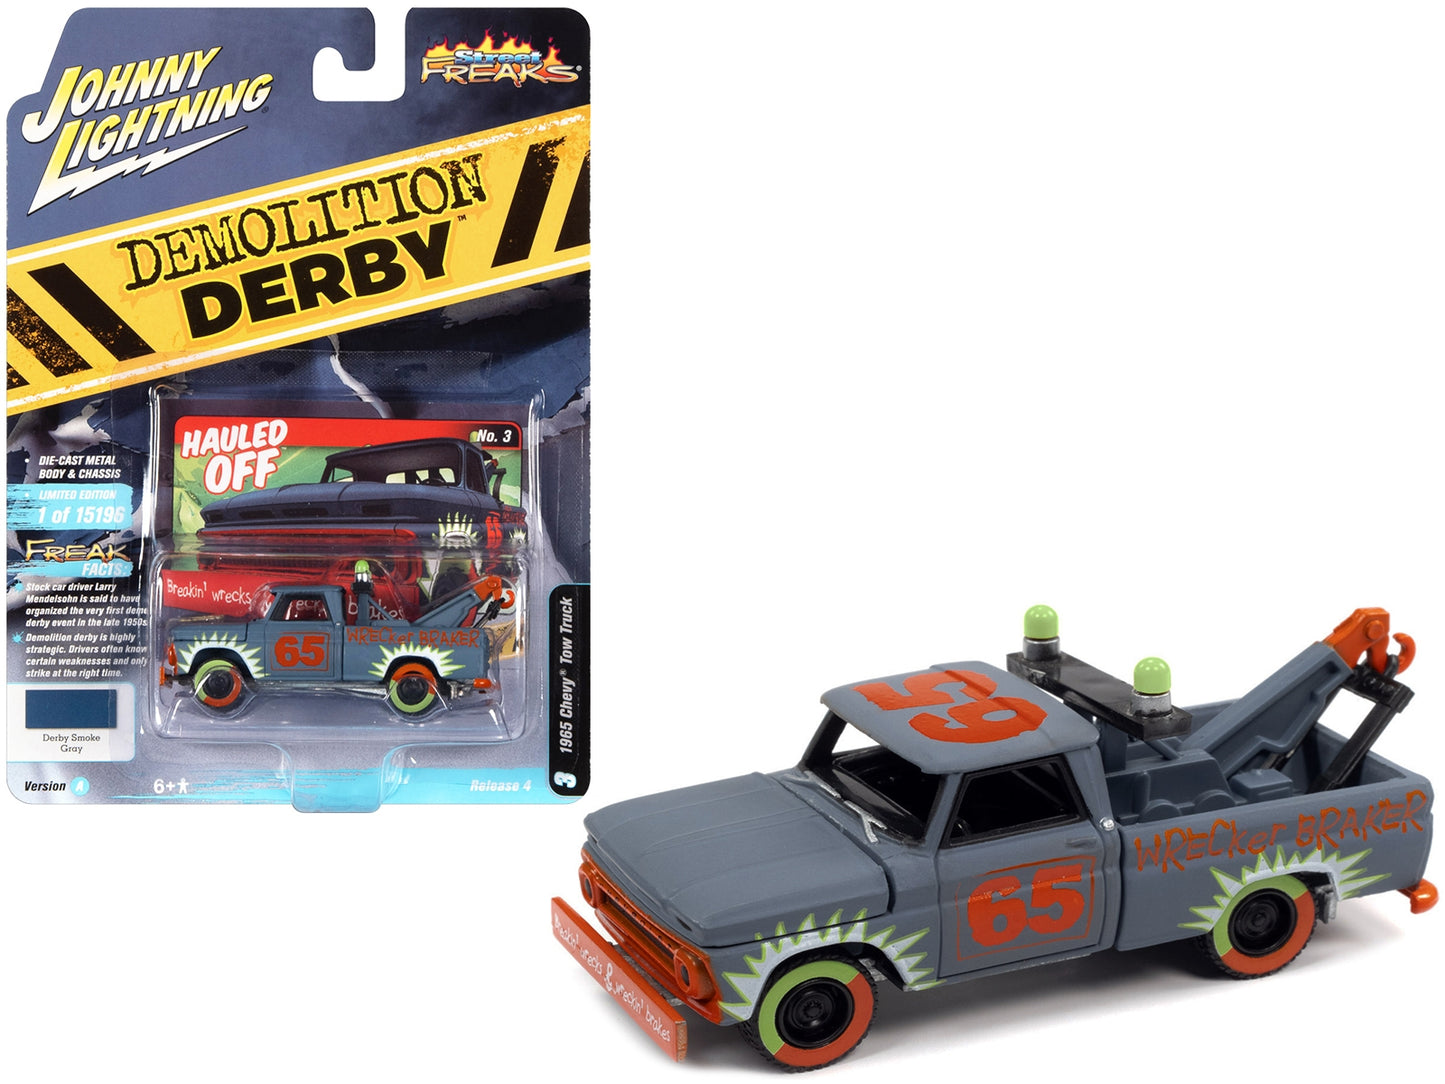 1965 Chevrolet Tow Truck #65 Derby Smoke Gray with Graphics "Demolition Derby" "Street Freaks" Series Limited Edition to 15196 pieces Worldwide 1/64 Diecast Model Car by Johnny Lightning